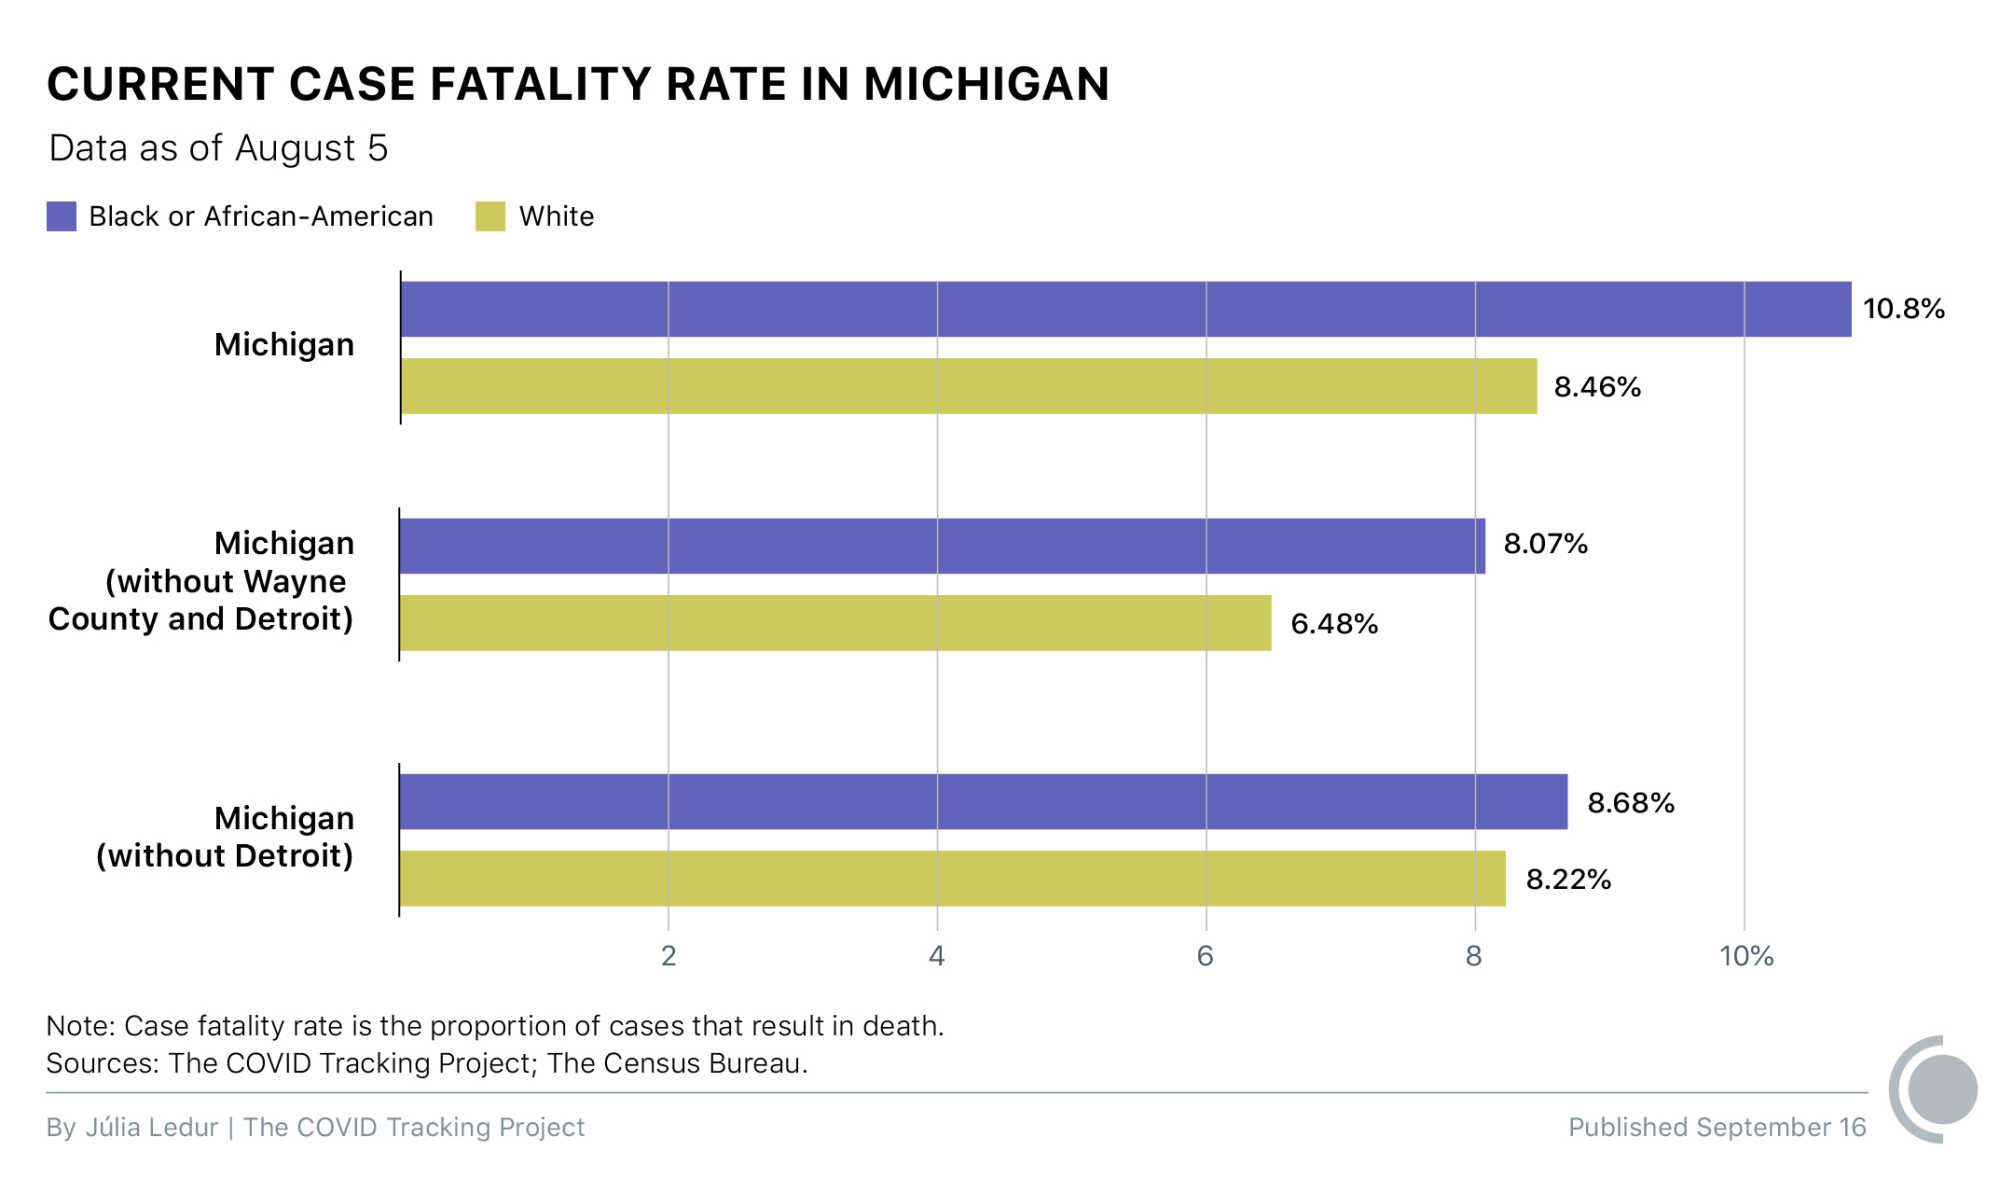 Displays the current case fatality rate for Black or African American people compared to for White people in Michigan, in Michigan without Wayne County or Detroit, and in Michigan without Detroit.